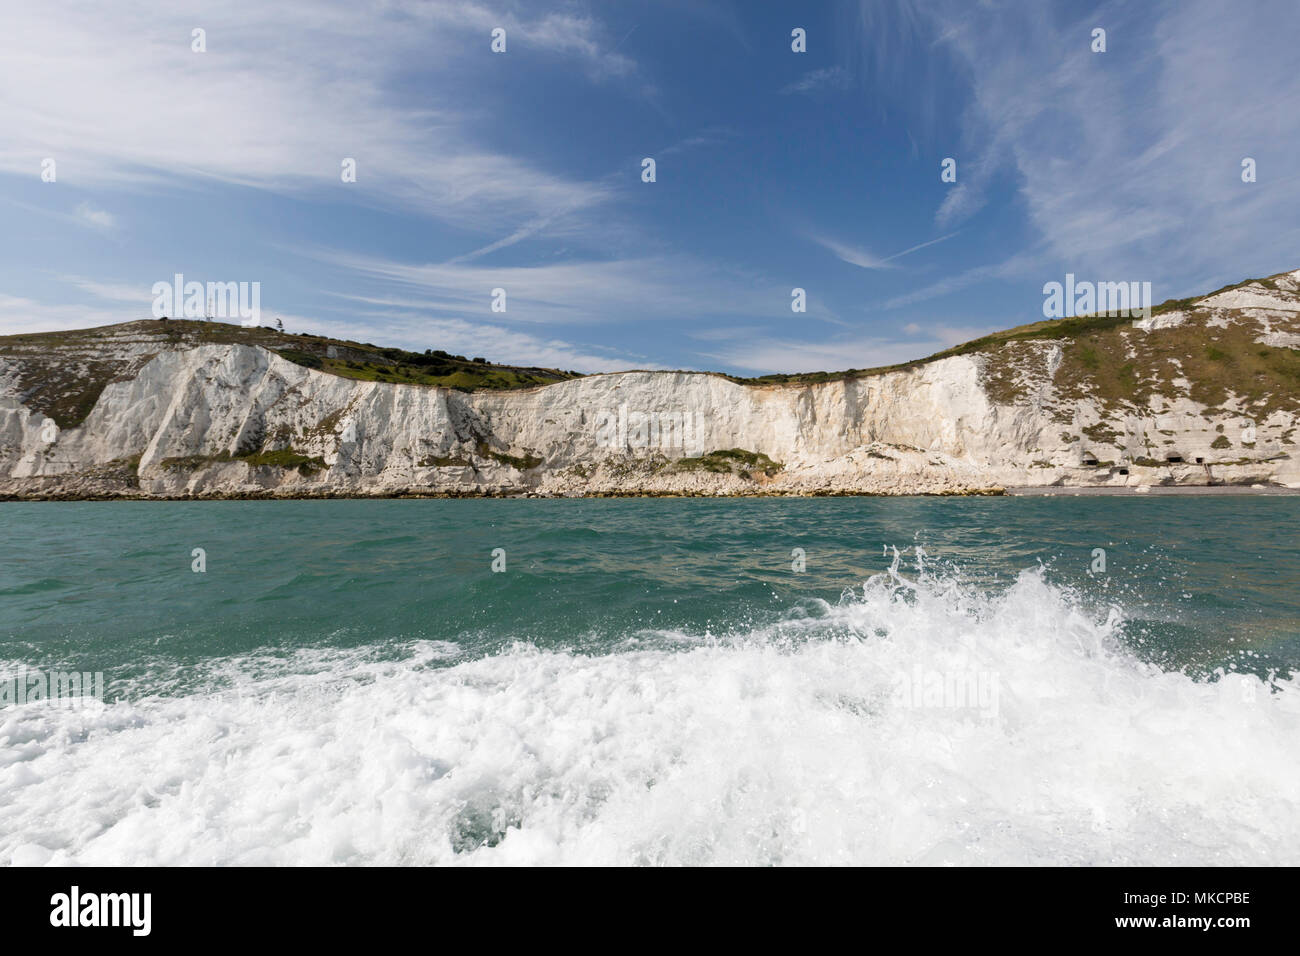 The White Cliffs of Dover taken from the English Channel. Stock Photo